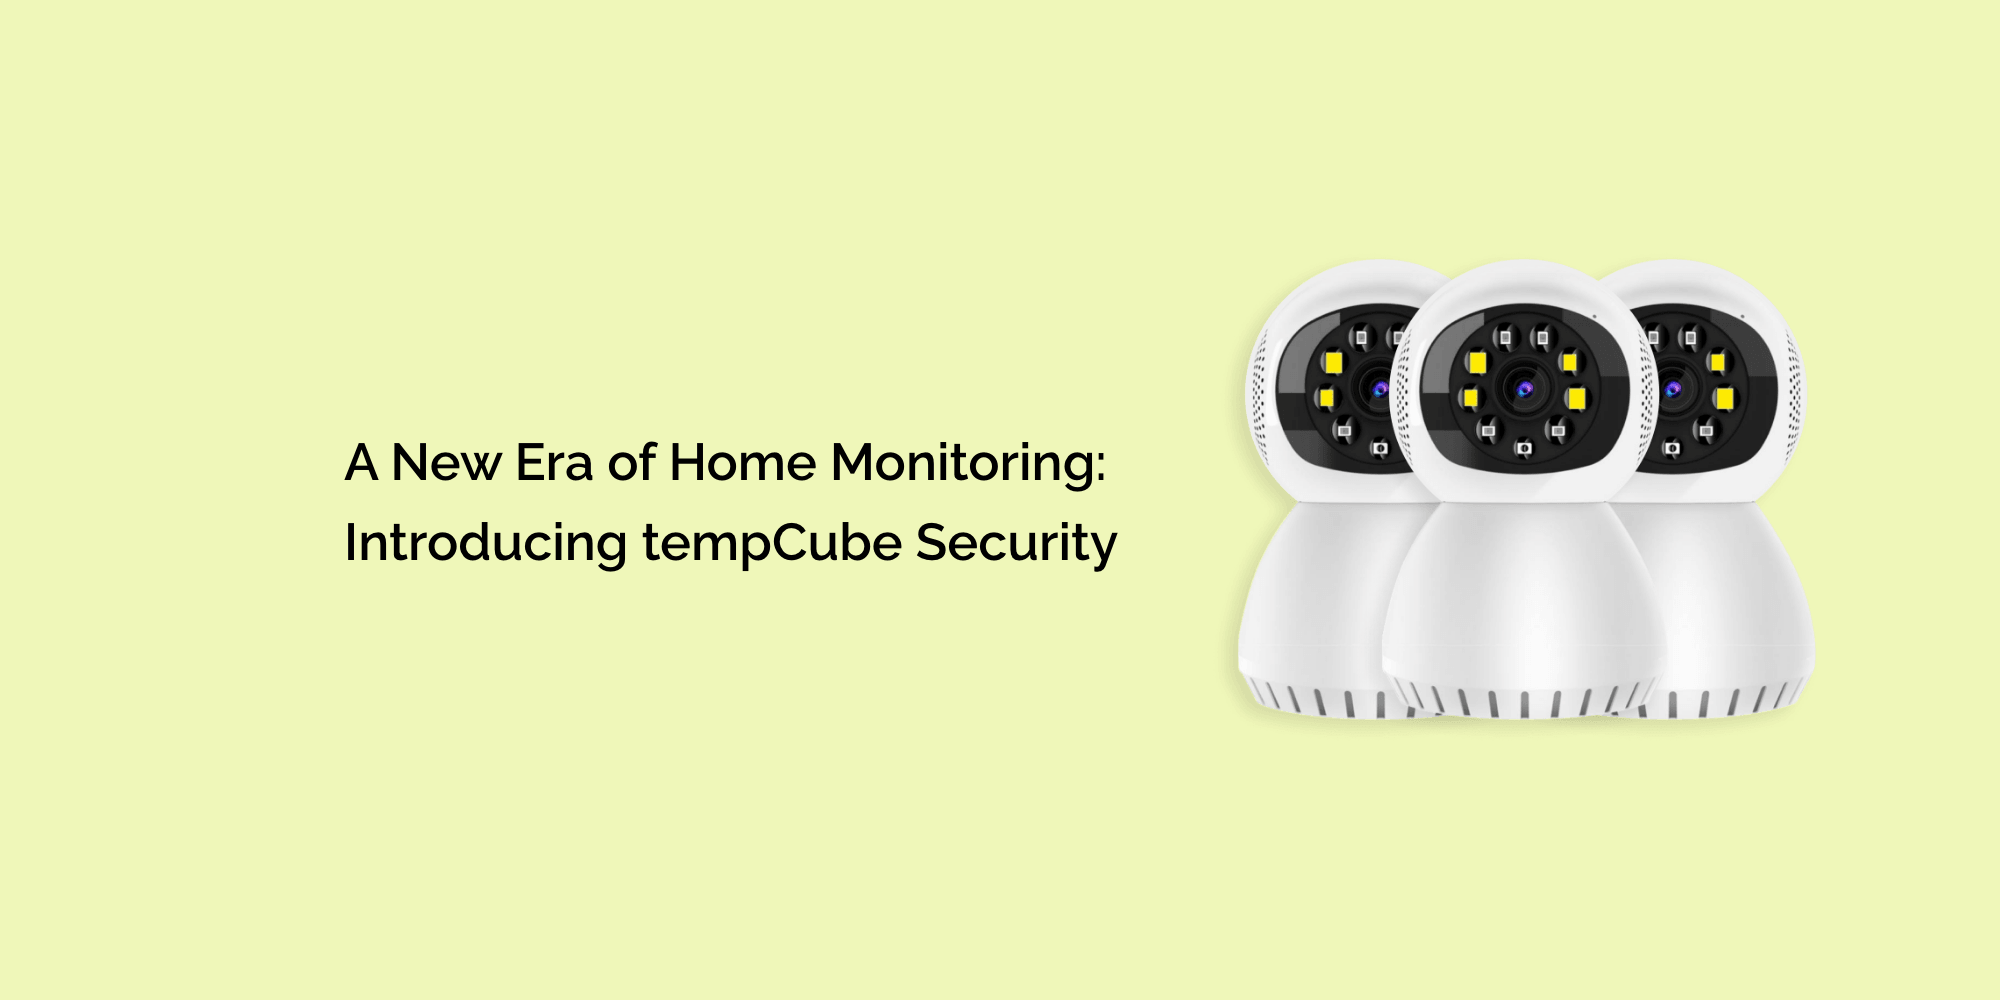 A New Era of Home Monitoring: Introducing tempCube Security